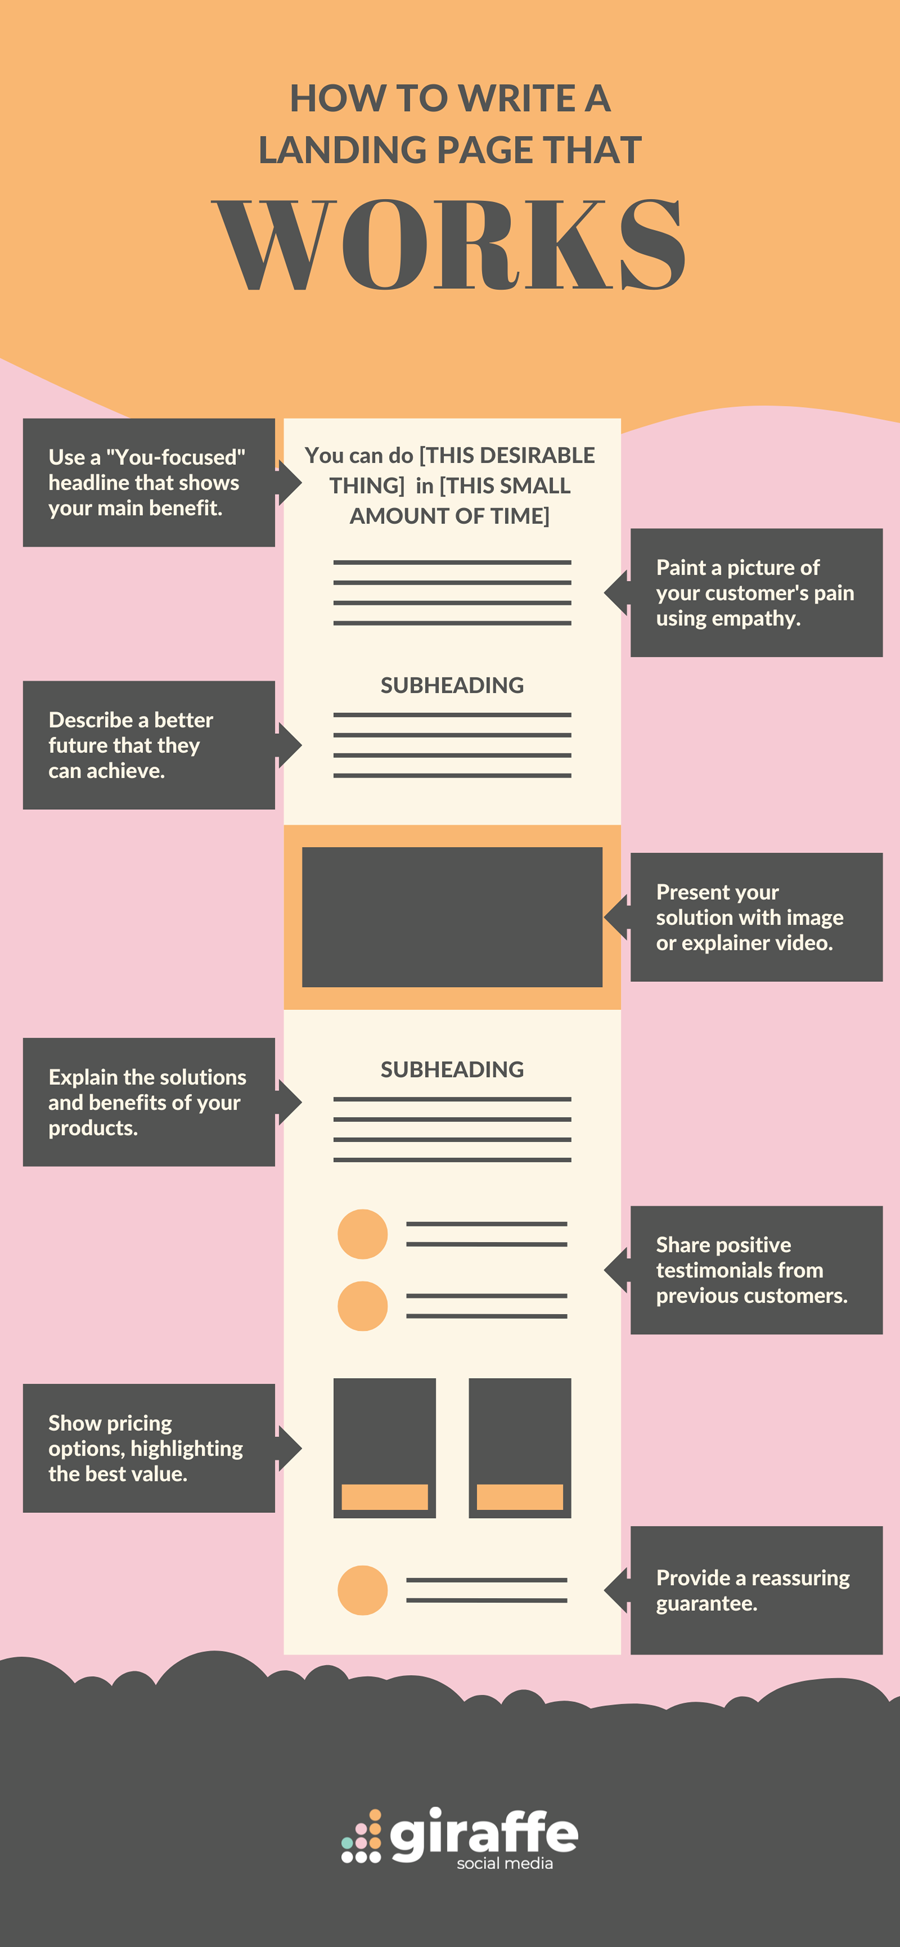 How to Write a Landing Page that Works